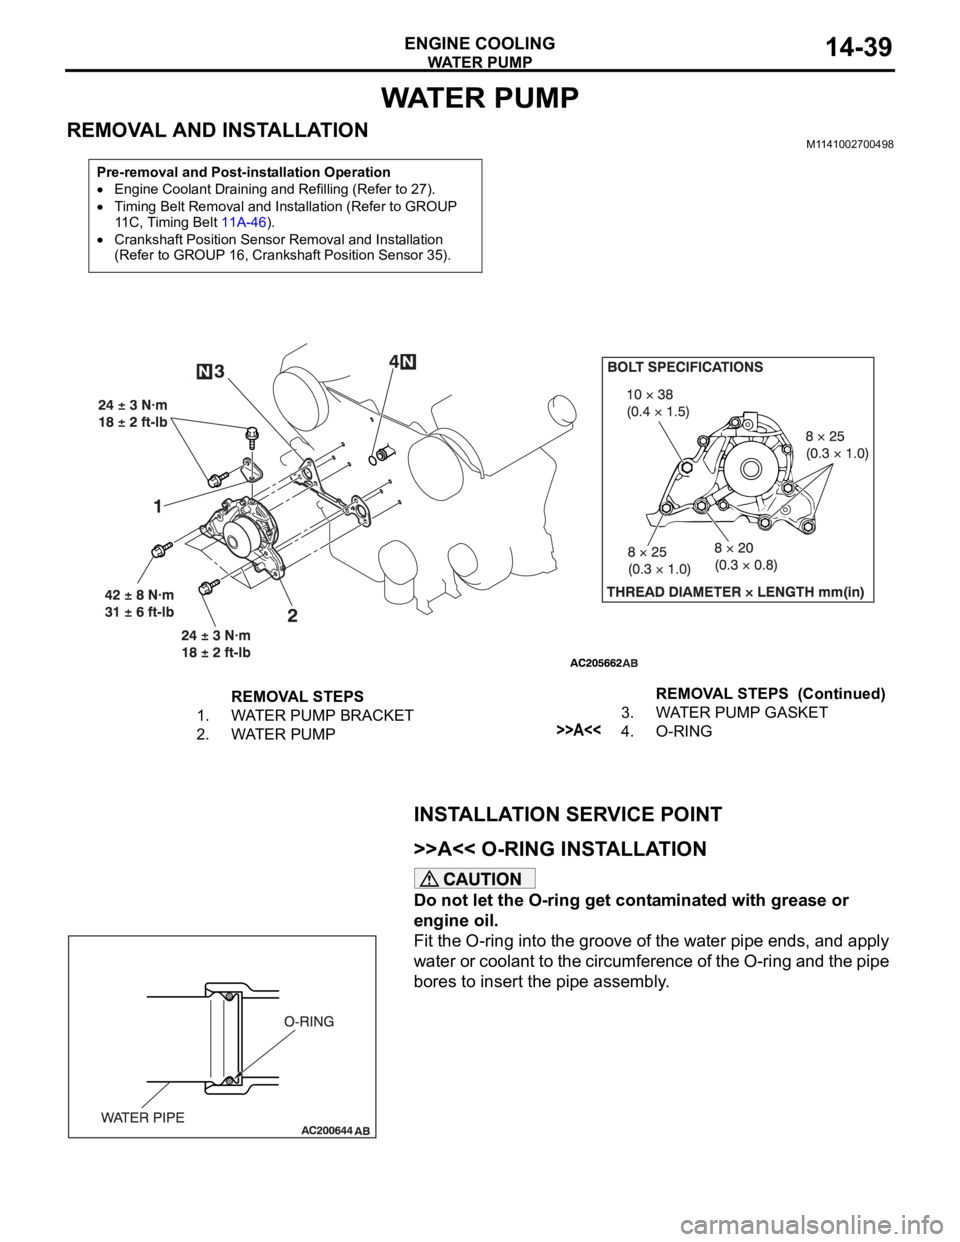 MITSUBISHI 380 2005 Service Manual WATE R   P U M P
ENGINE COOLING14-39
WAT E R   P U M P
REMOVAL AND INSTALLATIONM1141002700498
INSTALLATION SERVICE POINT
.
>>A<< O-RING INSTALLATION
Do not let the O-ring get contaminated with grease 